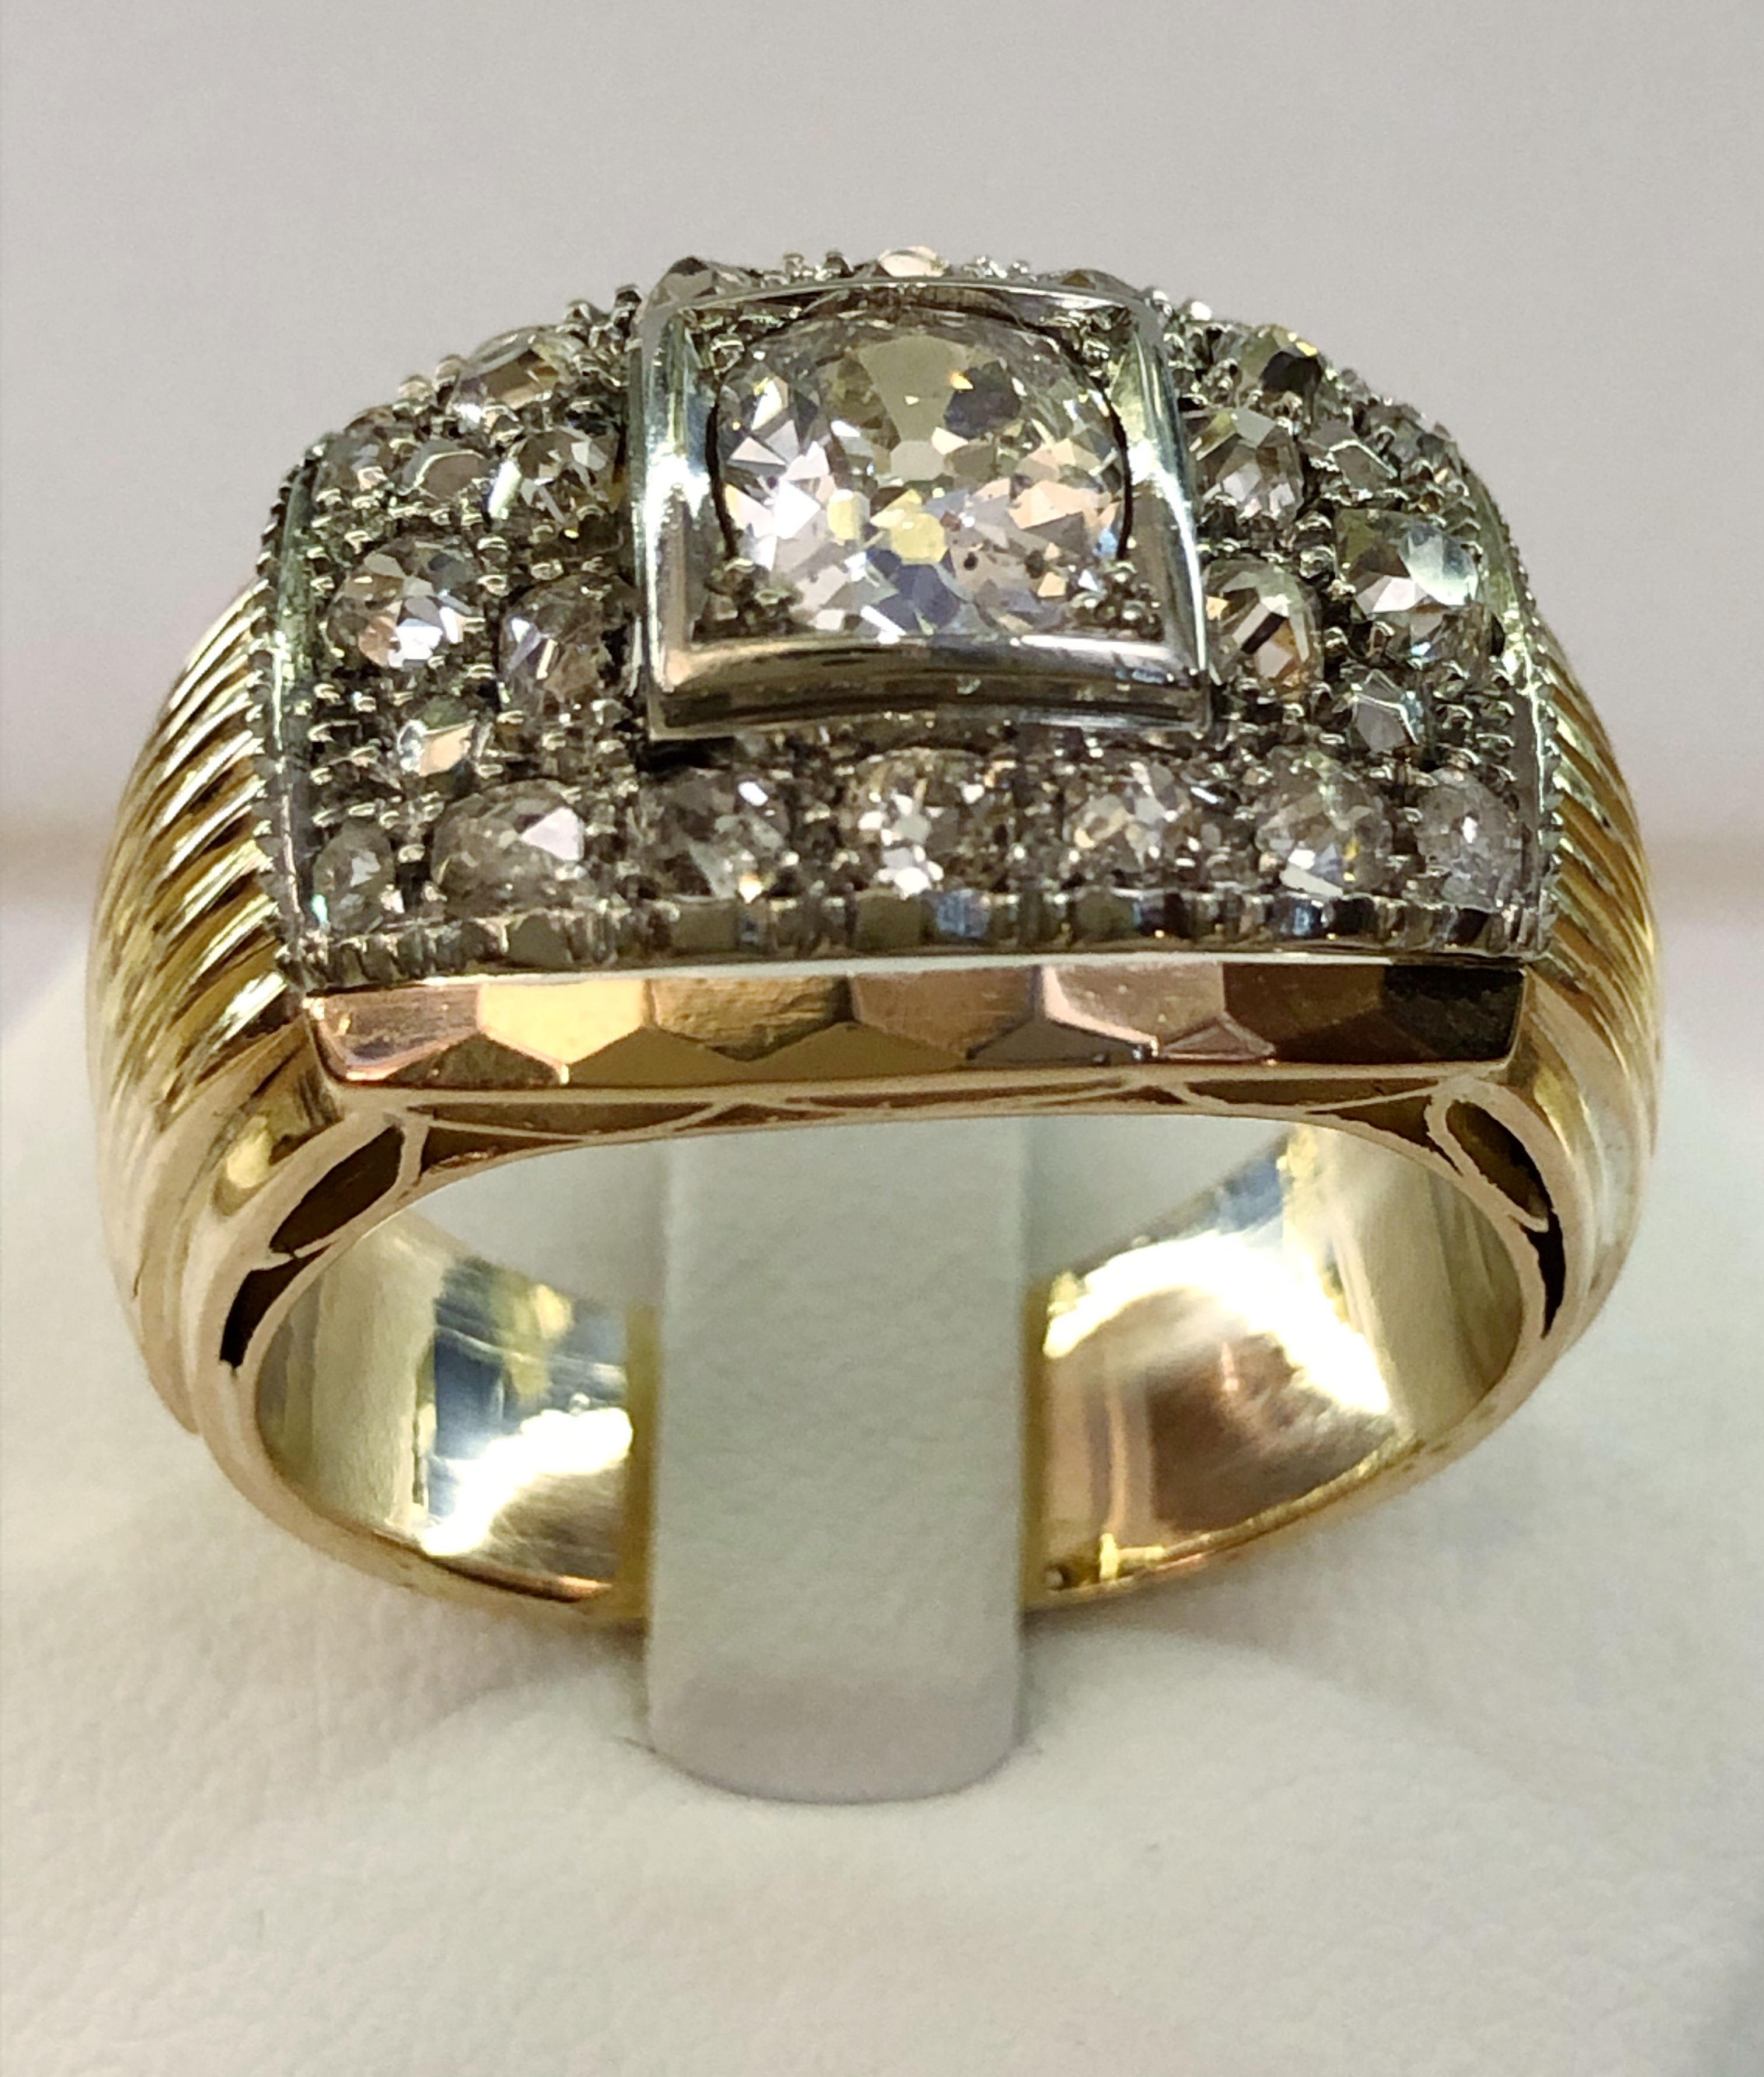 Art Deco 18 karat rose gold men's ring with a central brilliant diamond of 0.5 karats and Pave contour of brilliant diamonds for a total of 1.5 karats, Italy 1940s
Ring size US 9